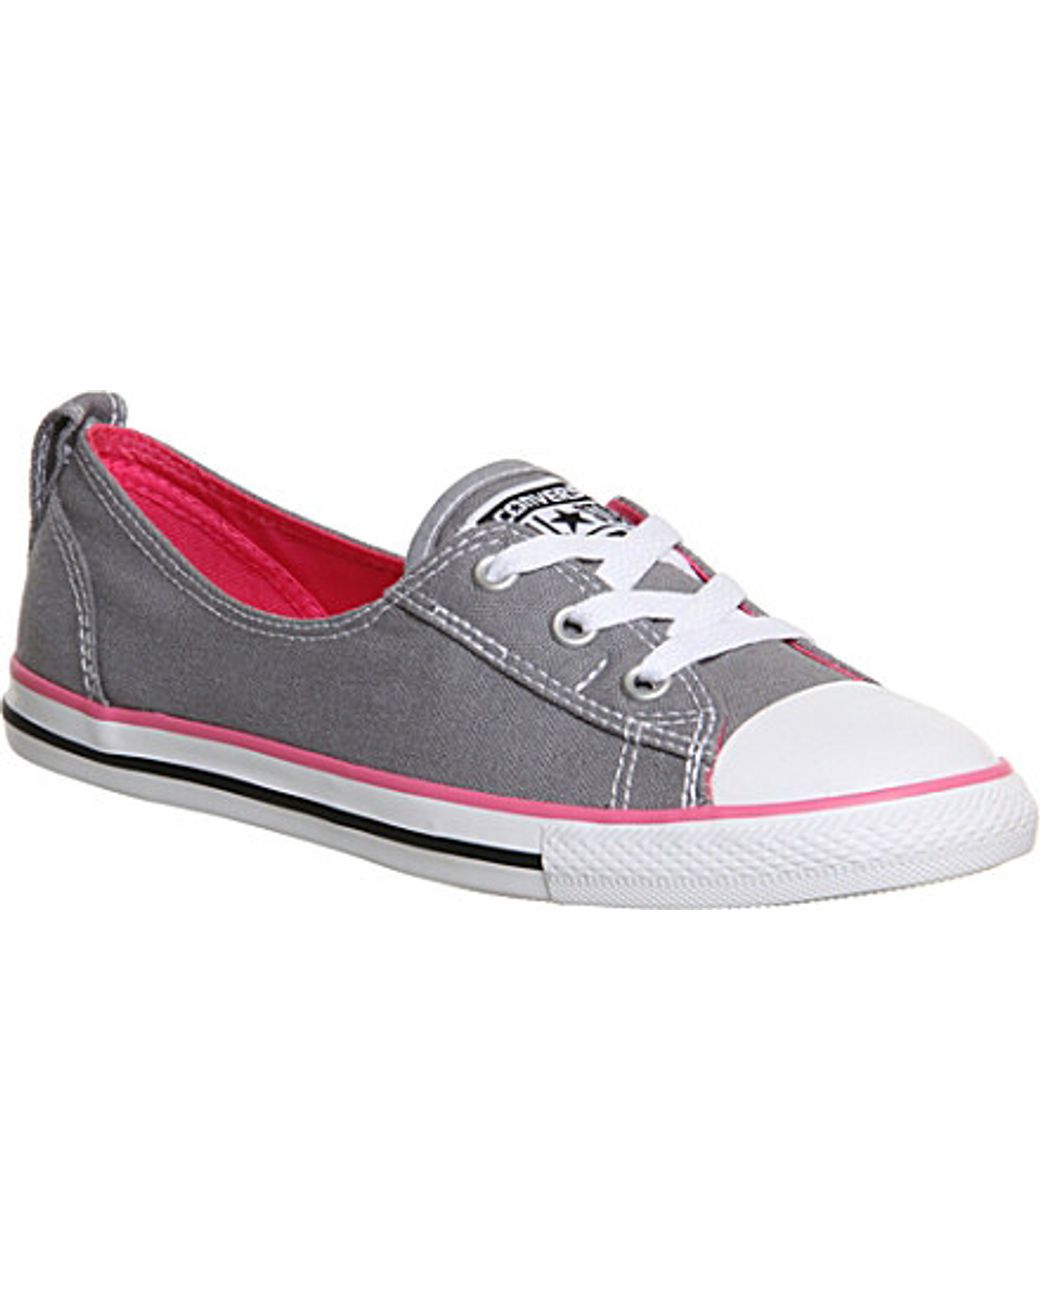 Converse Ctas Ballet Lace Trainers - For Women in Grey Lyst